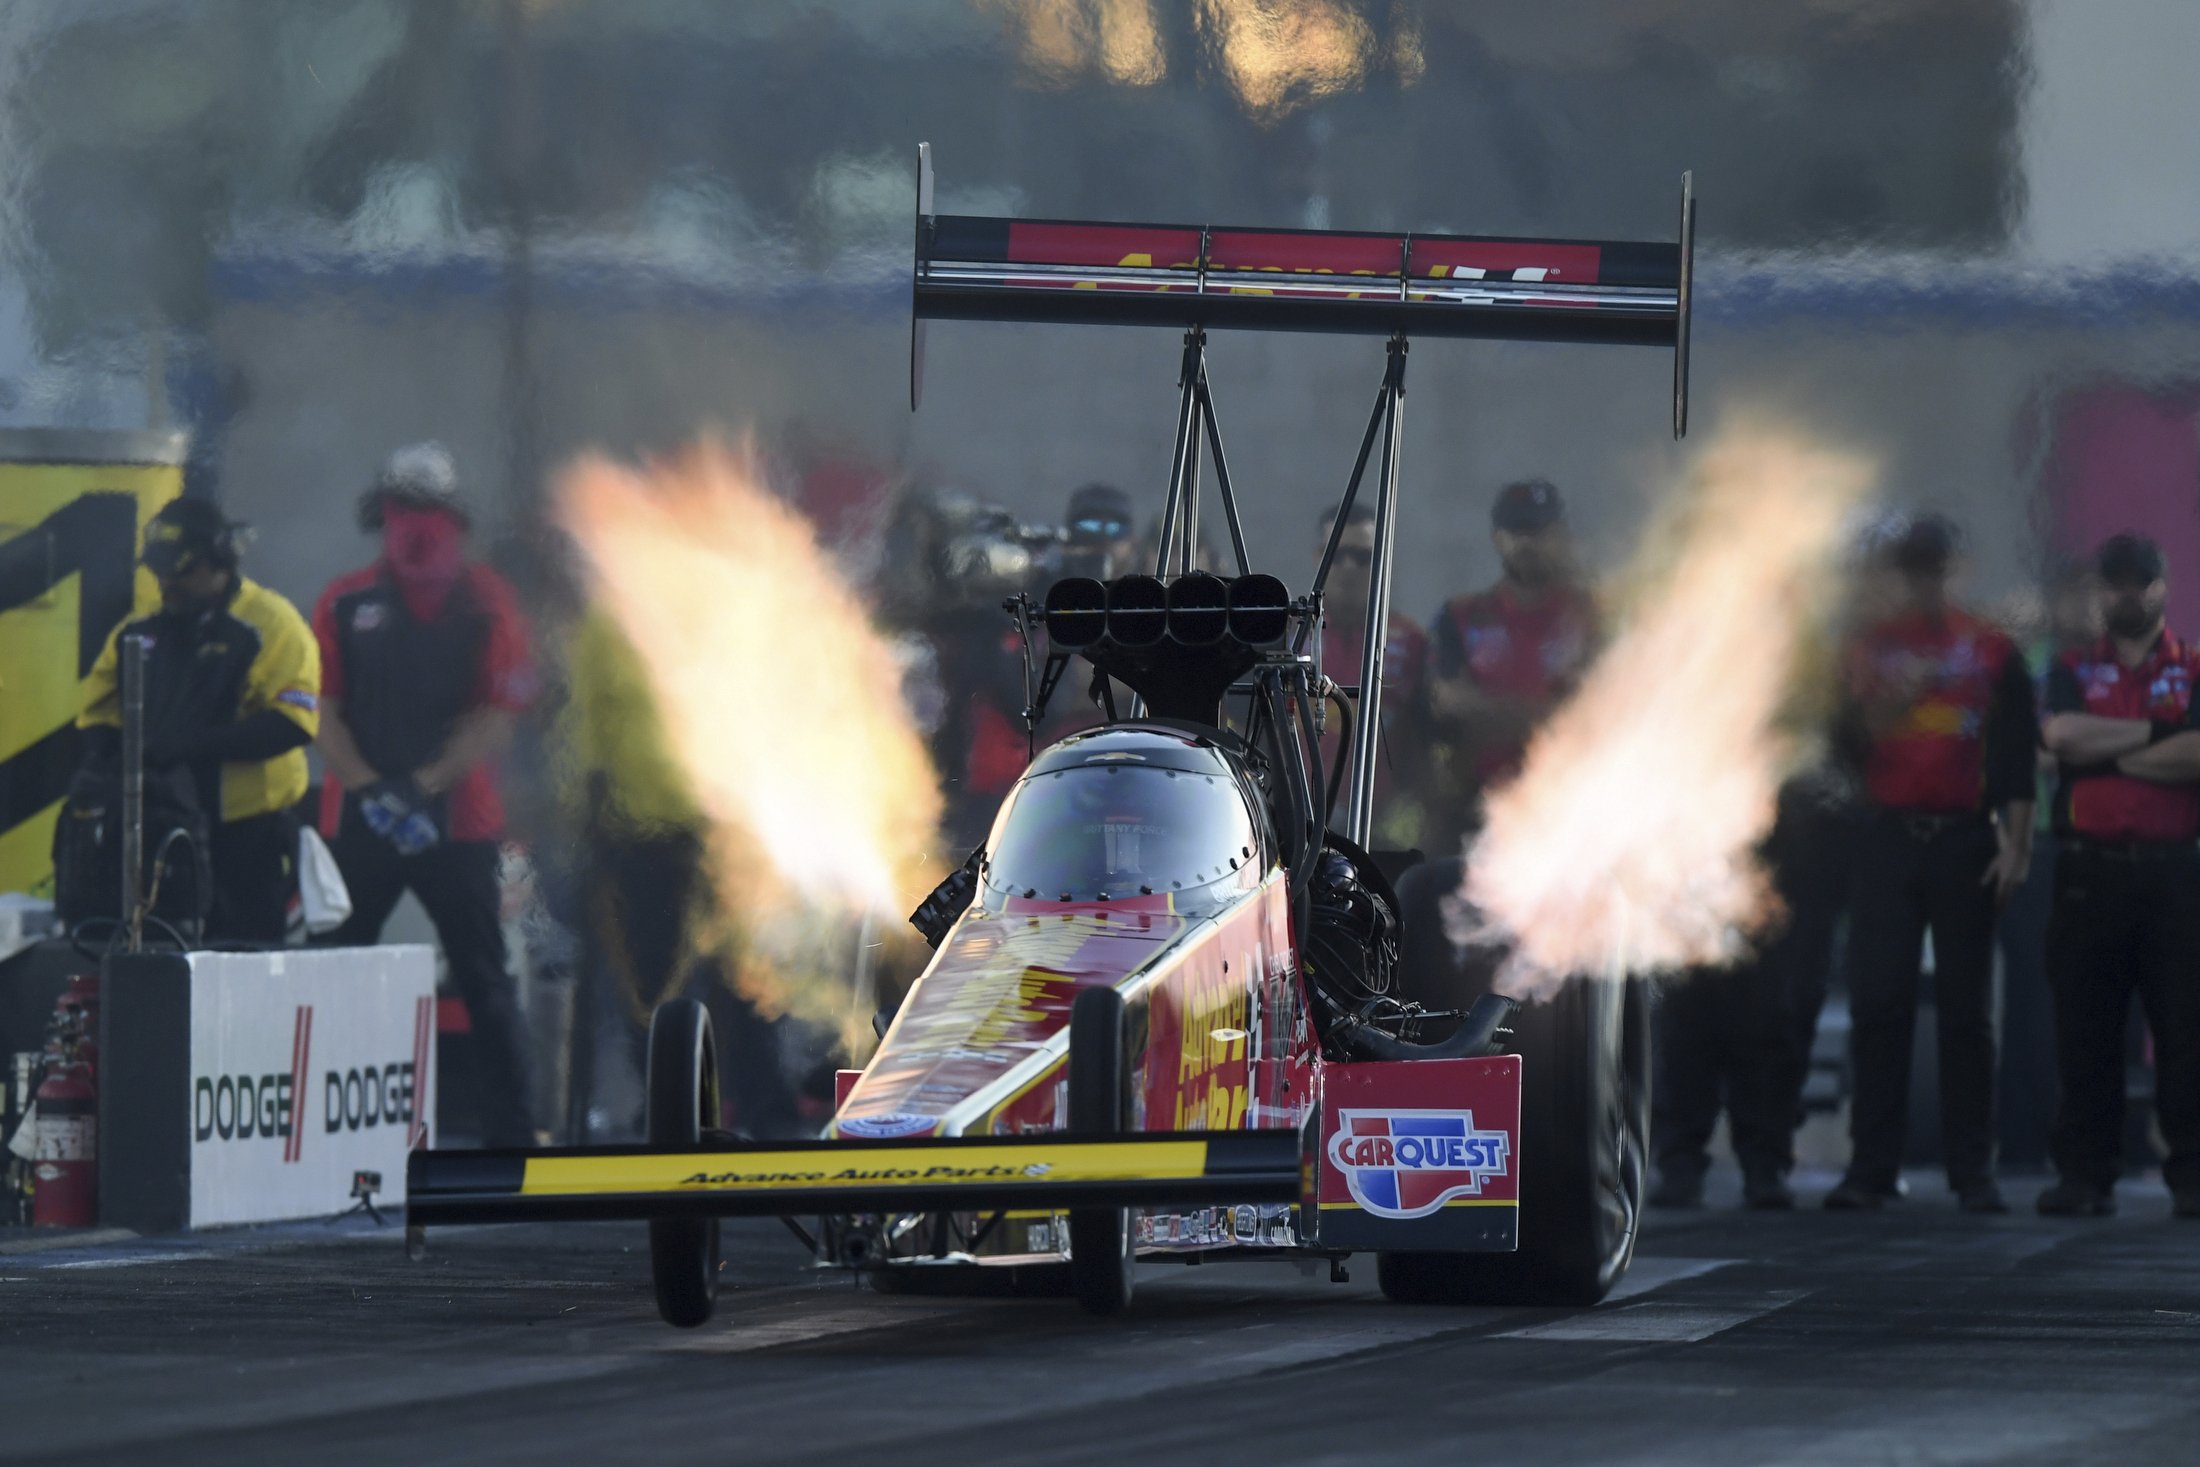 Brittany Force races to Top Fuel victory at Las Vegas AP News